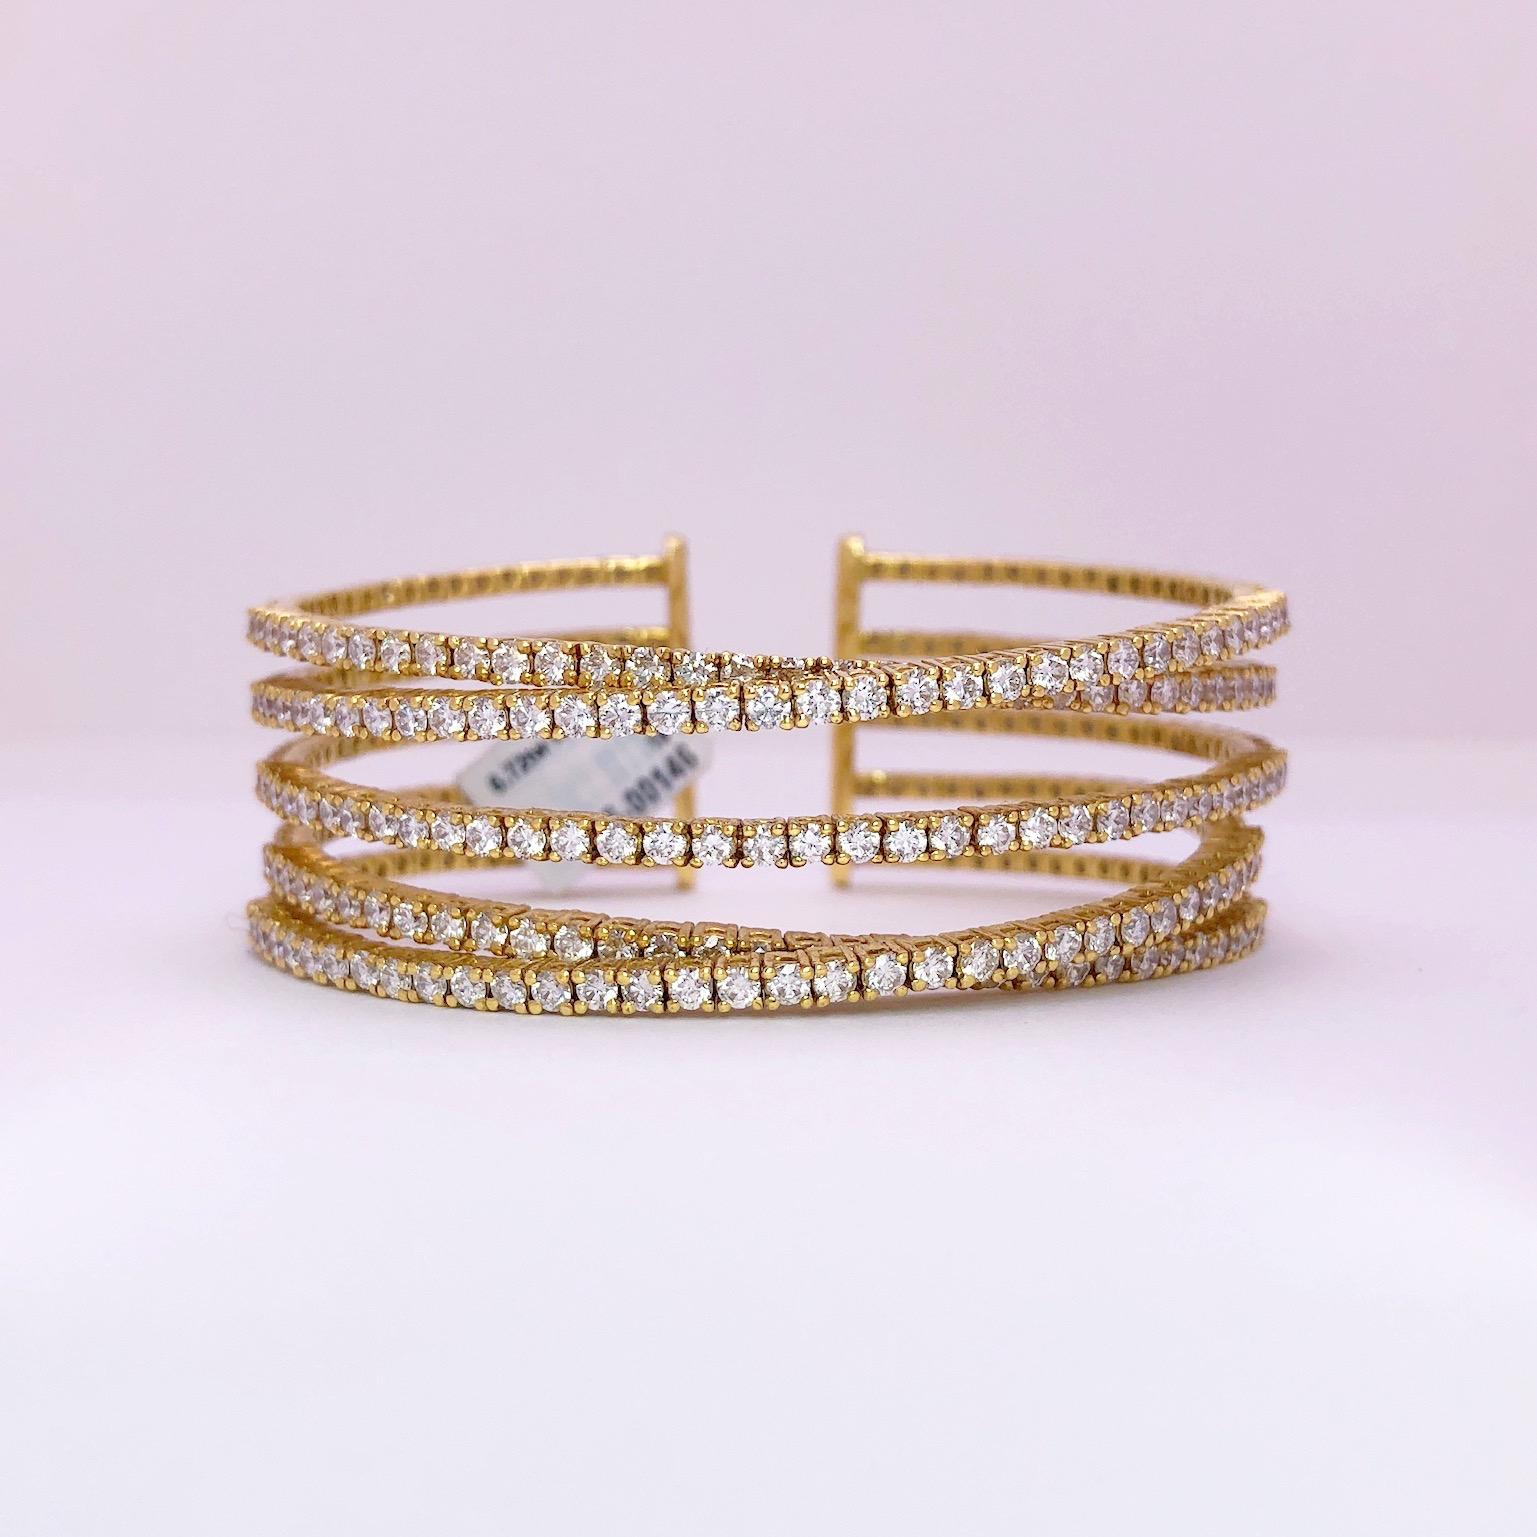 18 Karat Yellow Gold 6.72 Carat Diamond Flexible Cuff Bracelet In New Condition For Sale In New York, NY